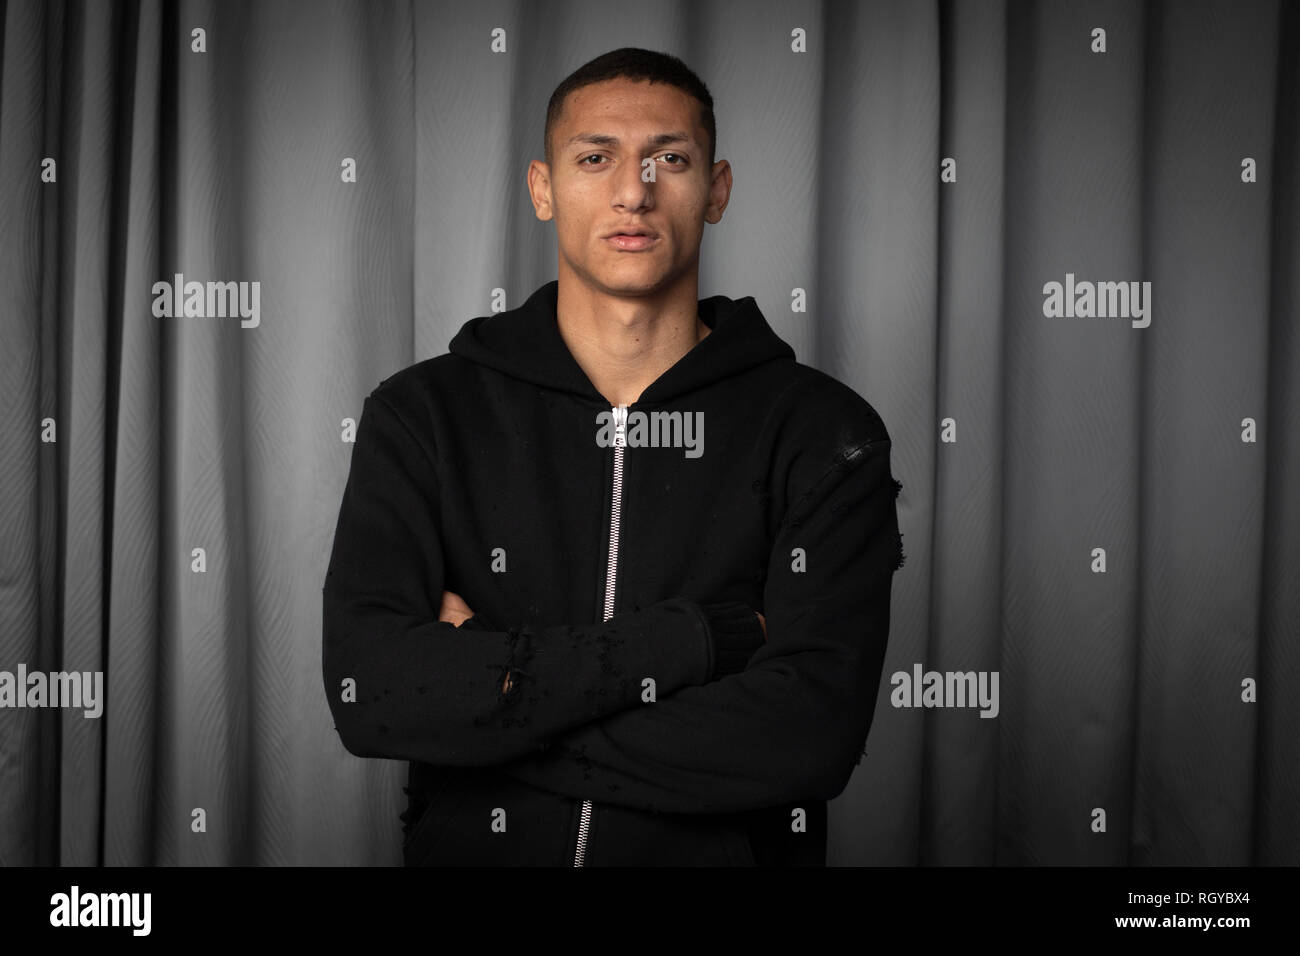 Everton footballer Richarlison, pictured at his home on Merseyside, which he shares with his agent Renato Velasco. The Brazilian forward joined Everton from Watford in 2018 and has already made his debut for the Brazil national team. He was due to play in his first Merseyside derby against Liverpool in three days time. Stock Photo